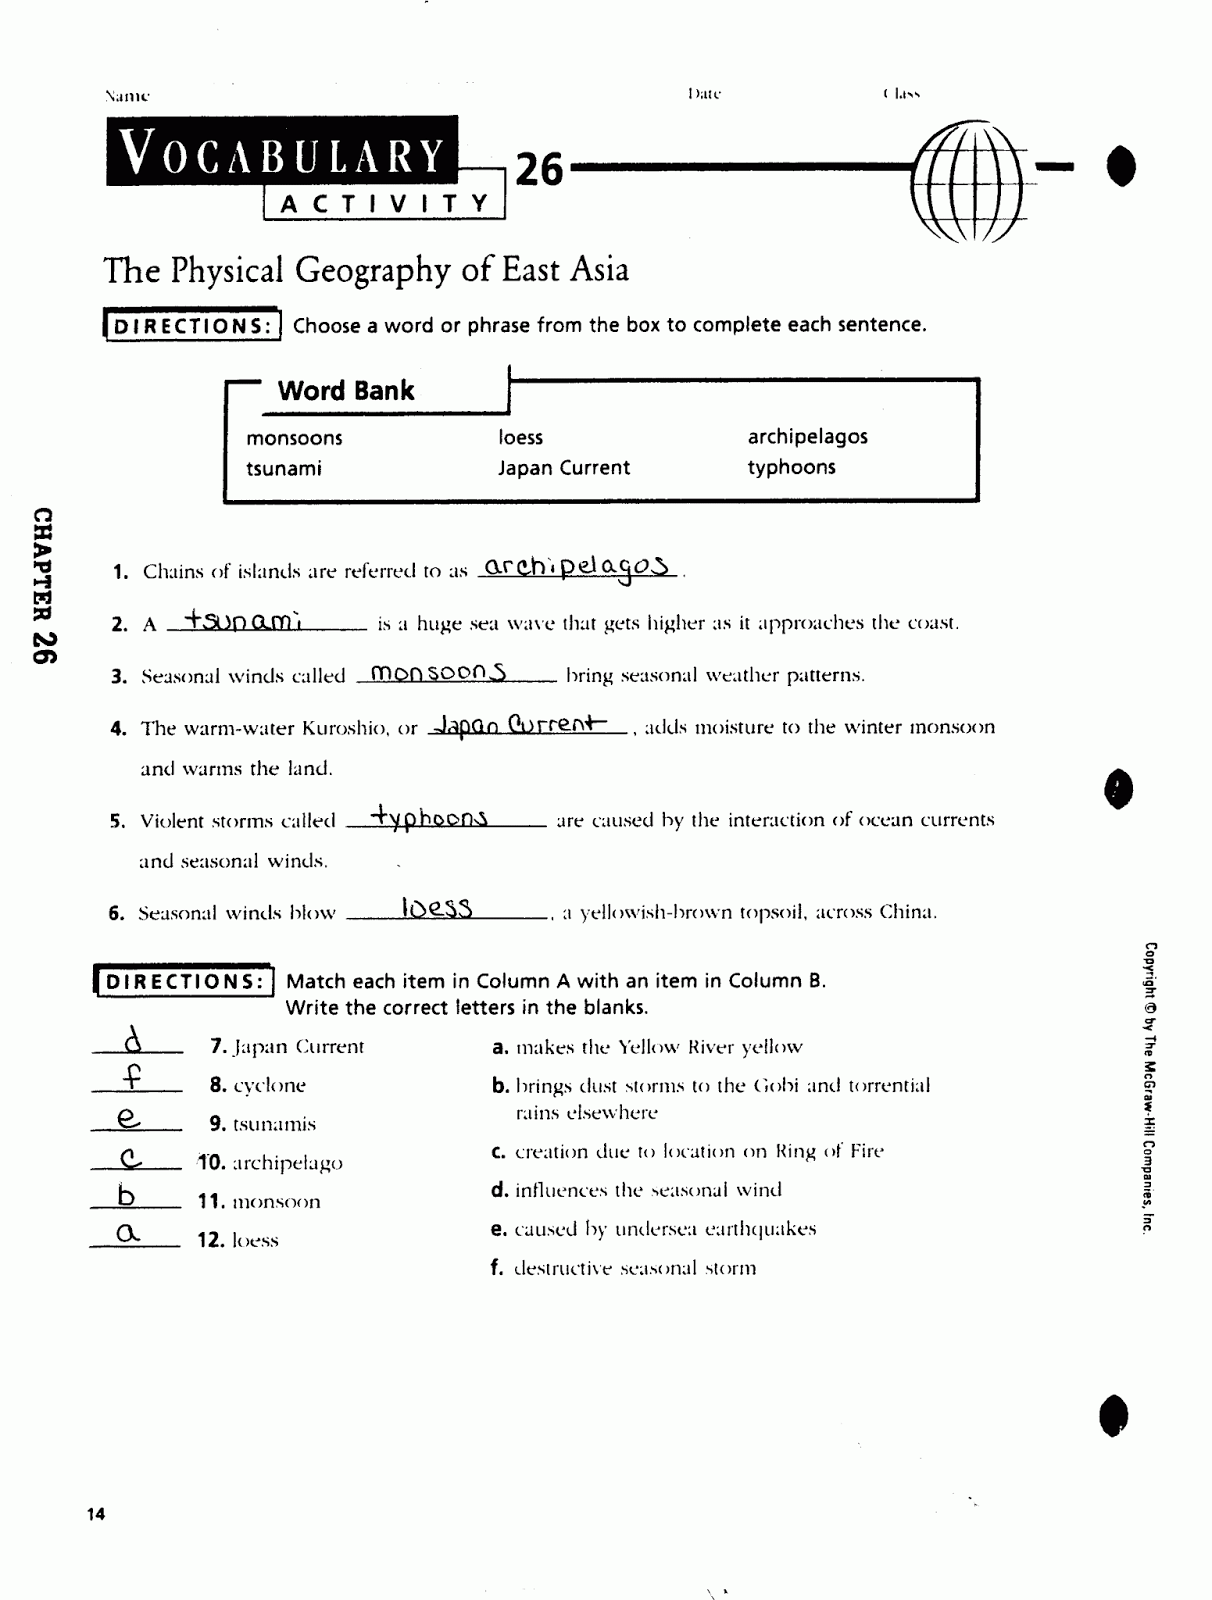 Mr. E's World Geography Page World Geography Chapter 26 The Physical Geography of East Asia